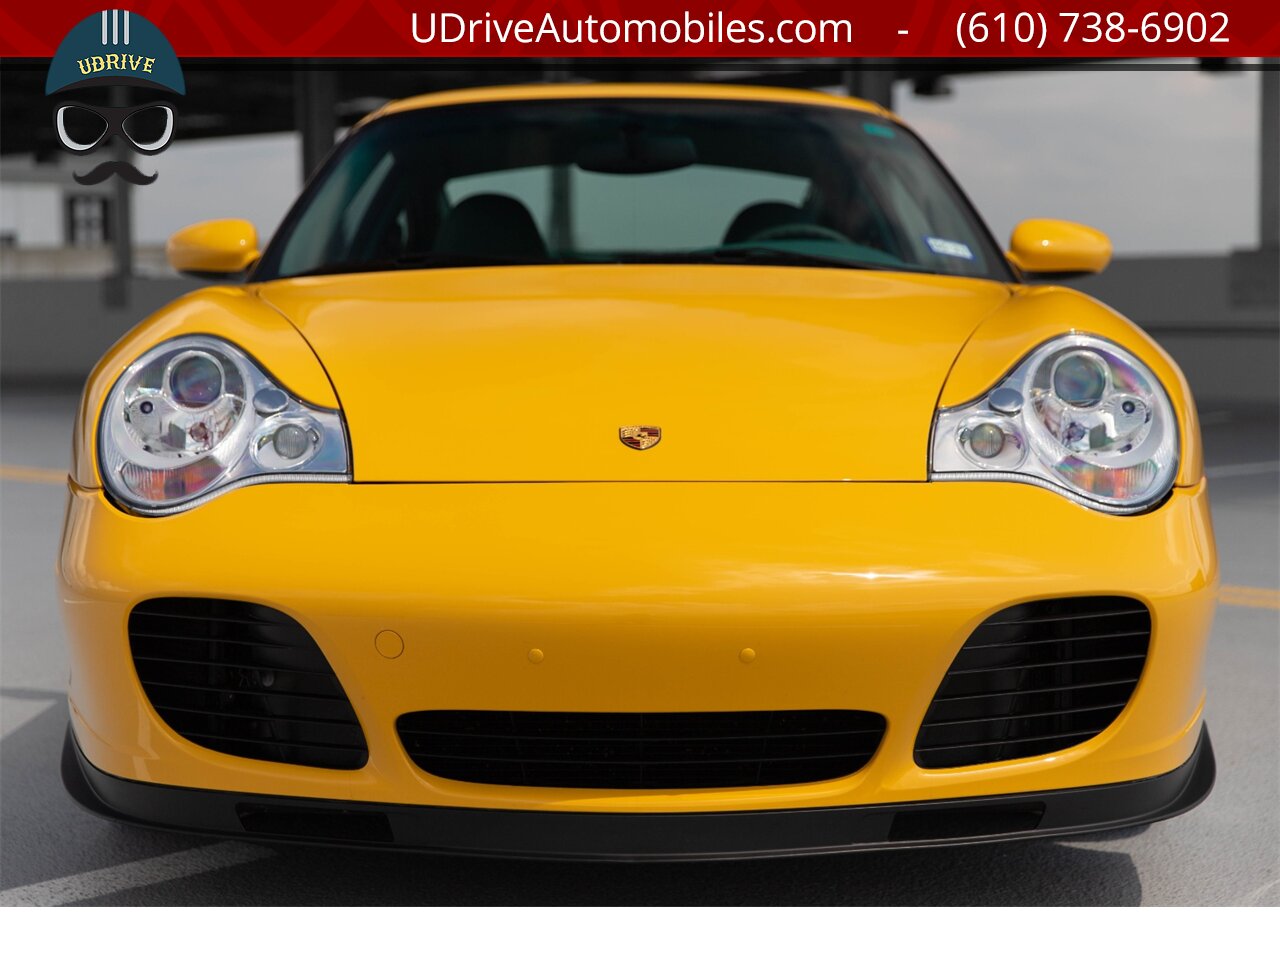 2003 Porsche 911 996 Turbo X50 6Sp Nephrite Green Lthr 9k Miles  Deviating Yellow Stitching Collector Grade BACK AGAIN - Photo 10 - West Chester, PA 19382